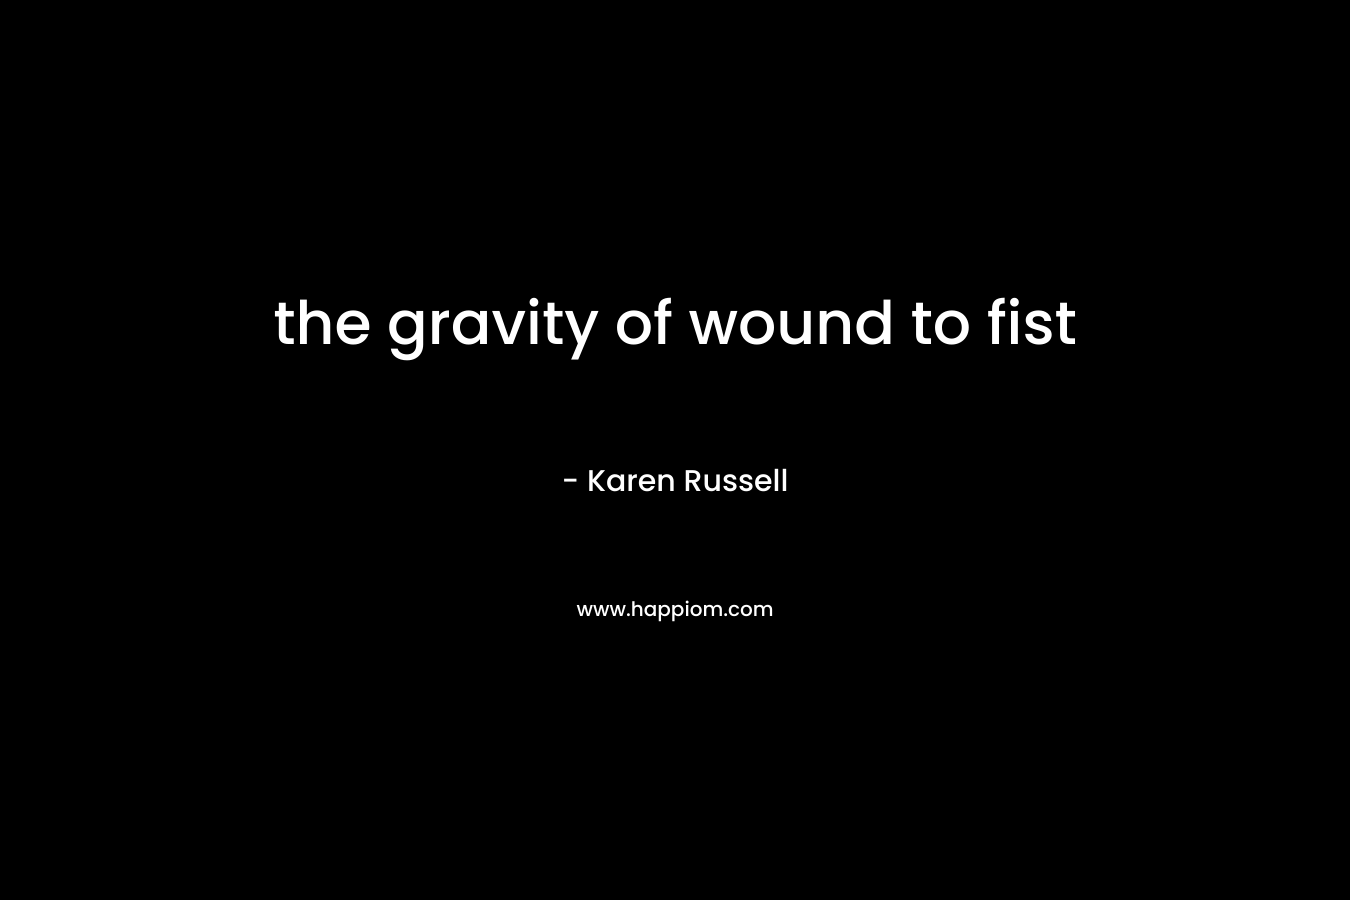 the gravity of wound to fist